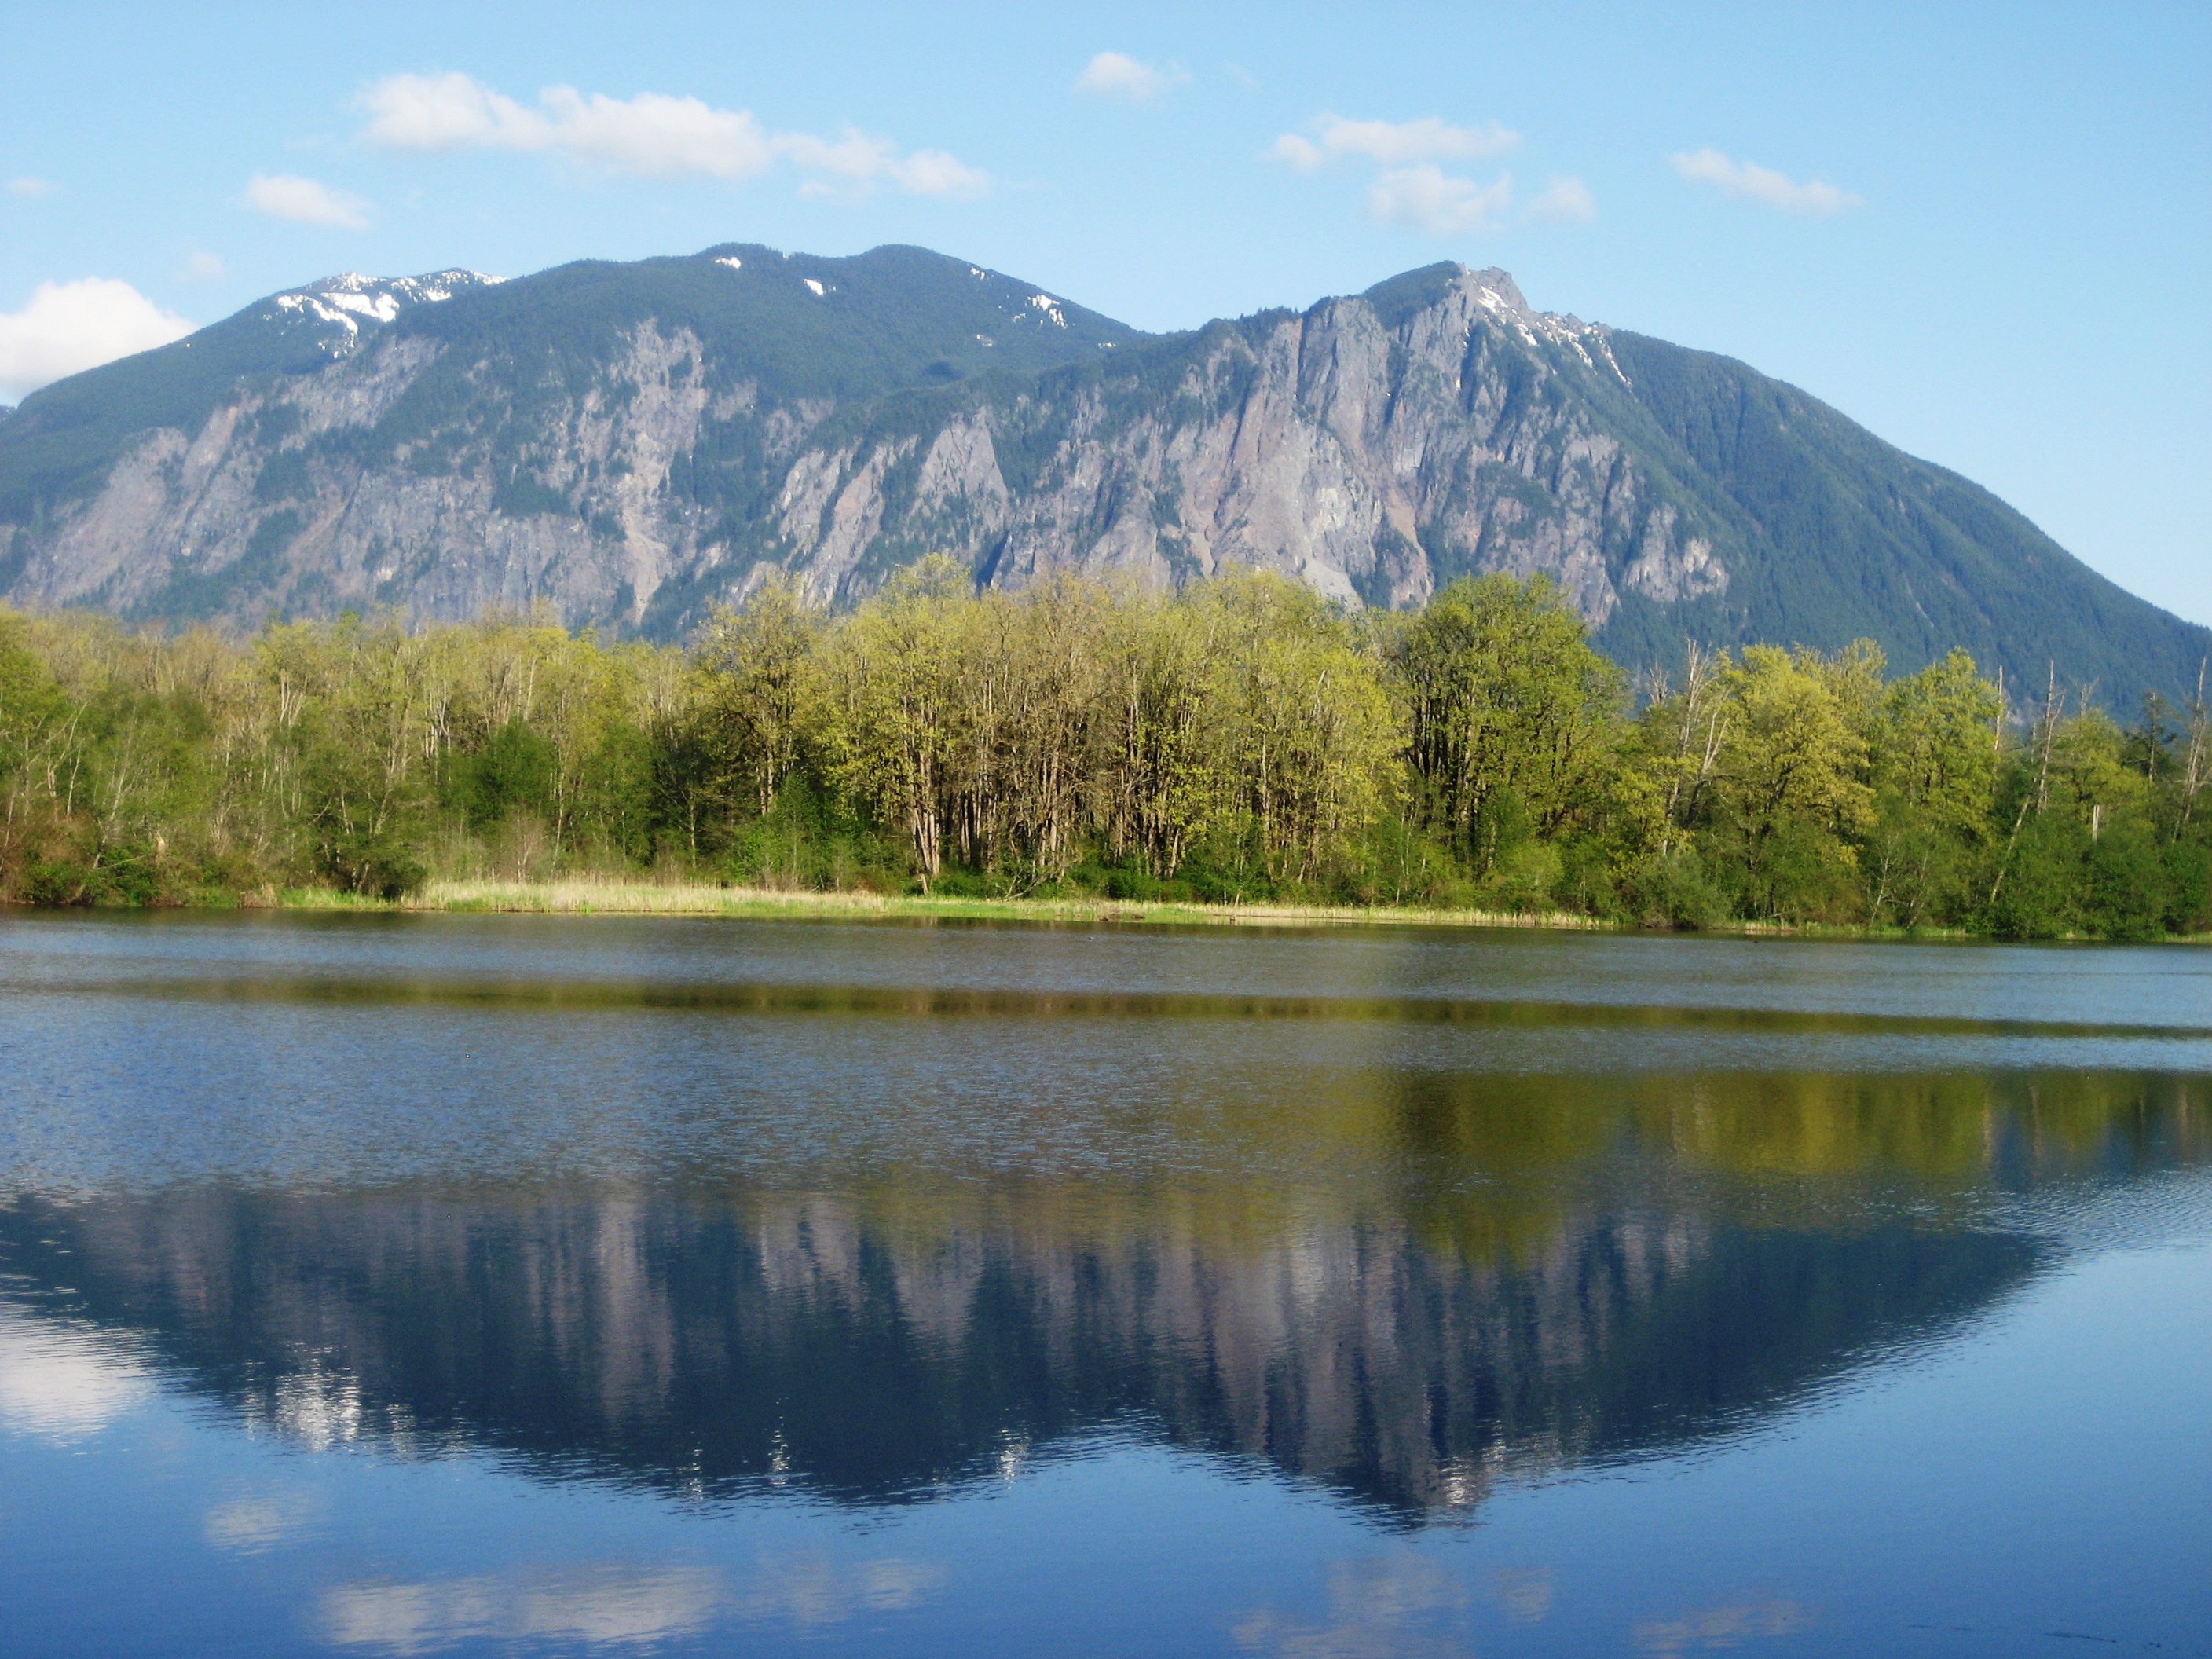 A mountain with a line of green trees in front of it. It is reflected in the pond in front of it.